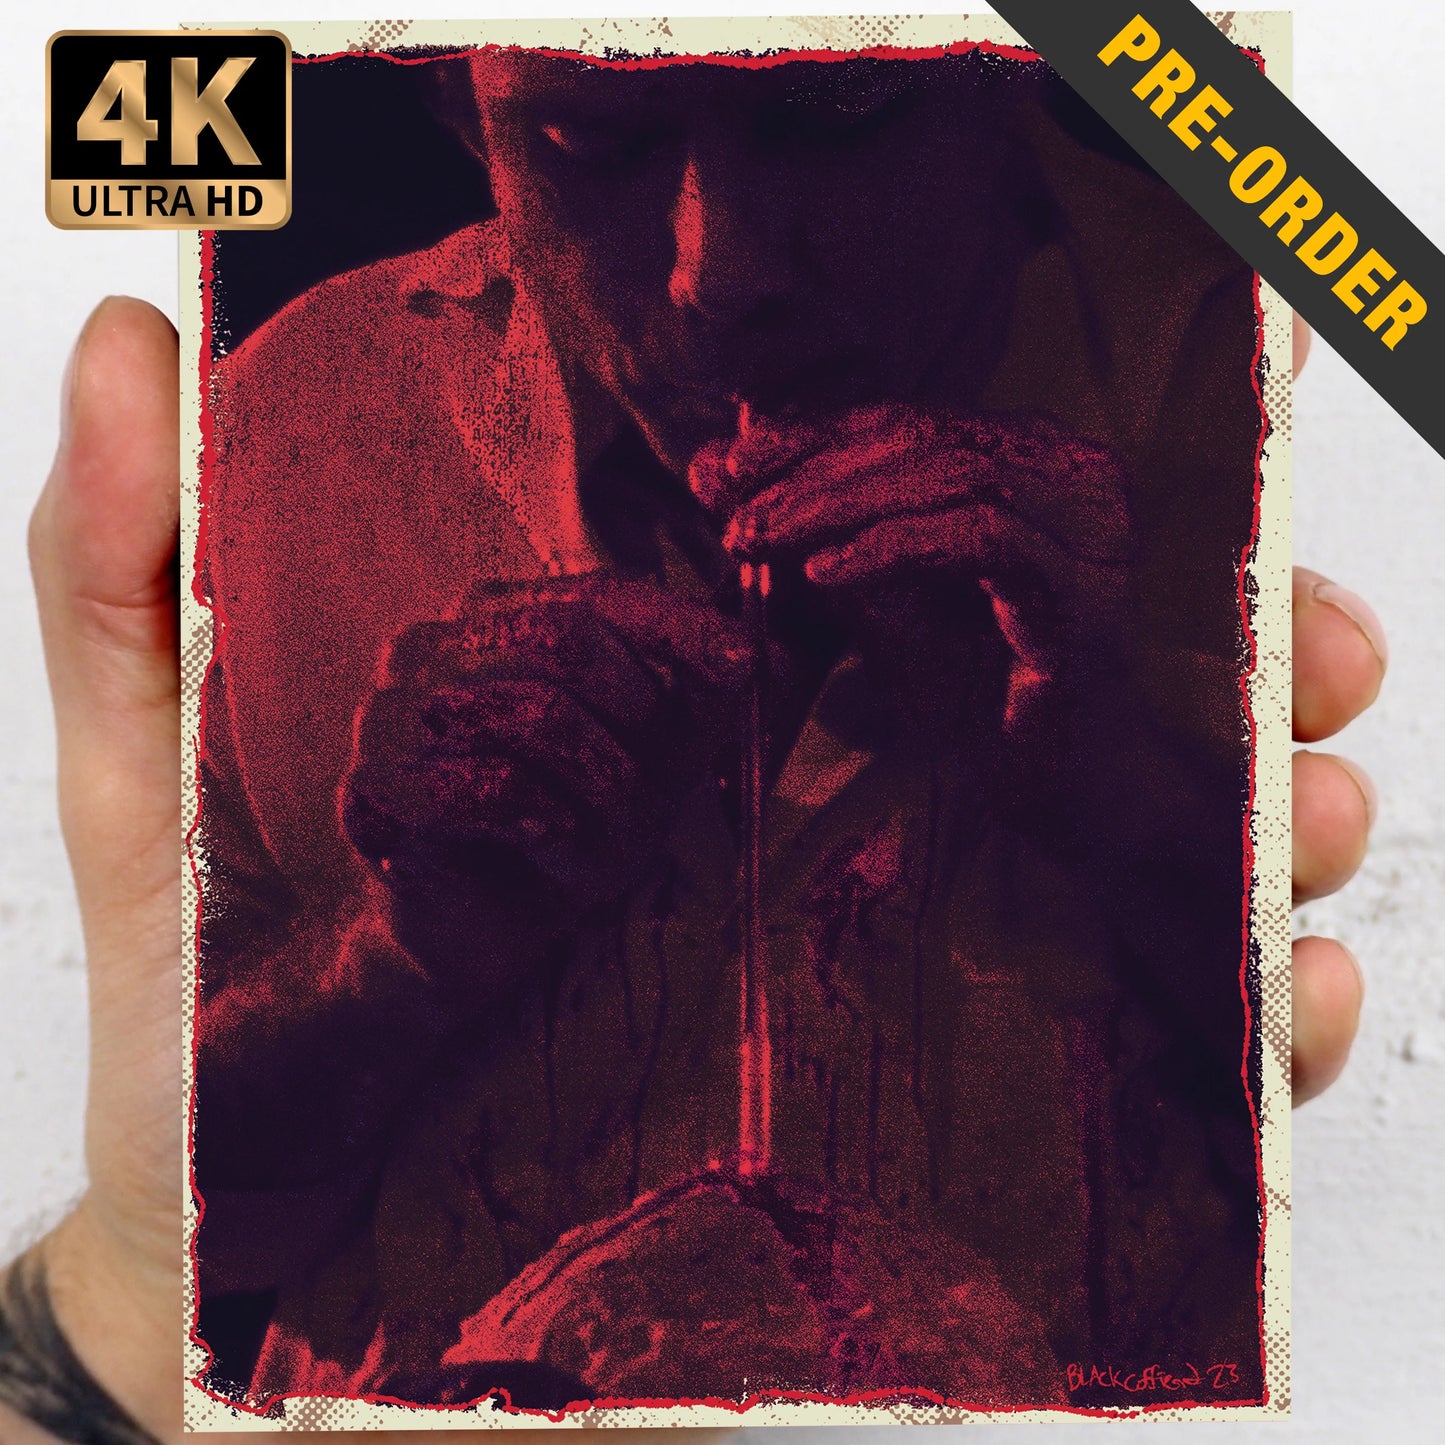 Blood Sucking Freaks 4K UHD + Blu-ray with Limited Edition Reversible Slipcover (Vinegar Syndrome)